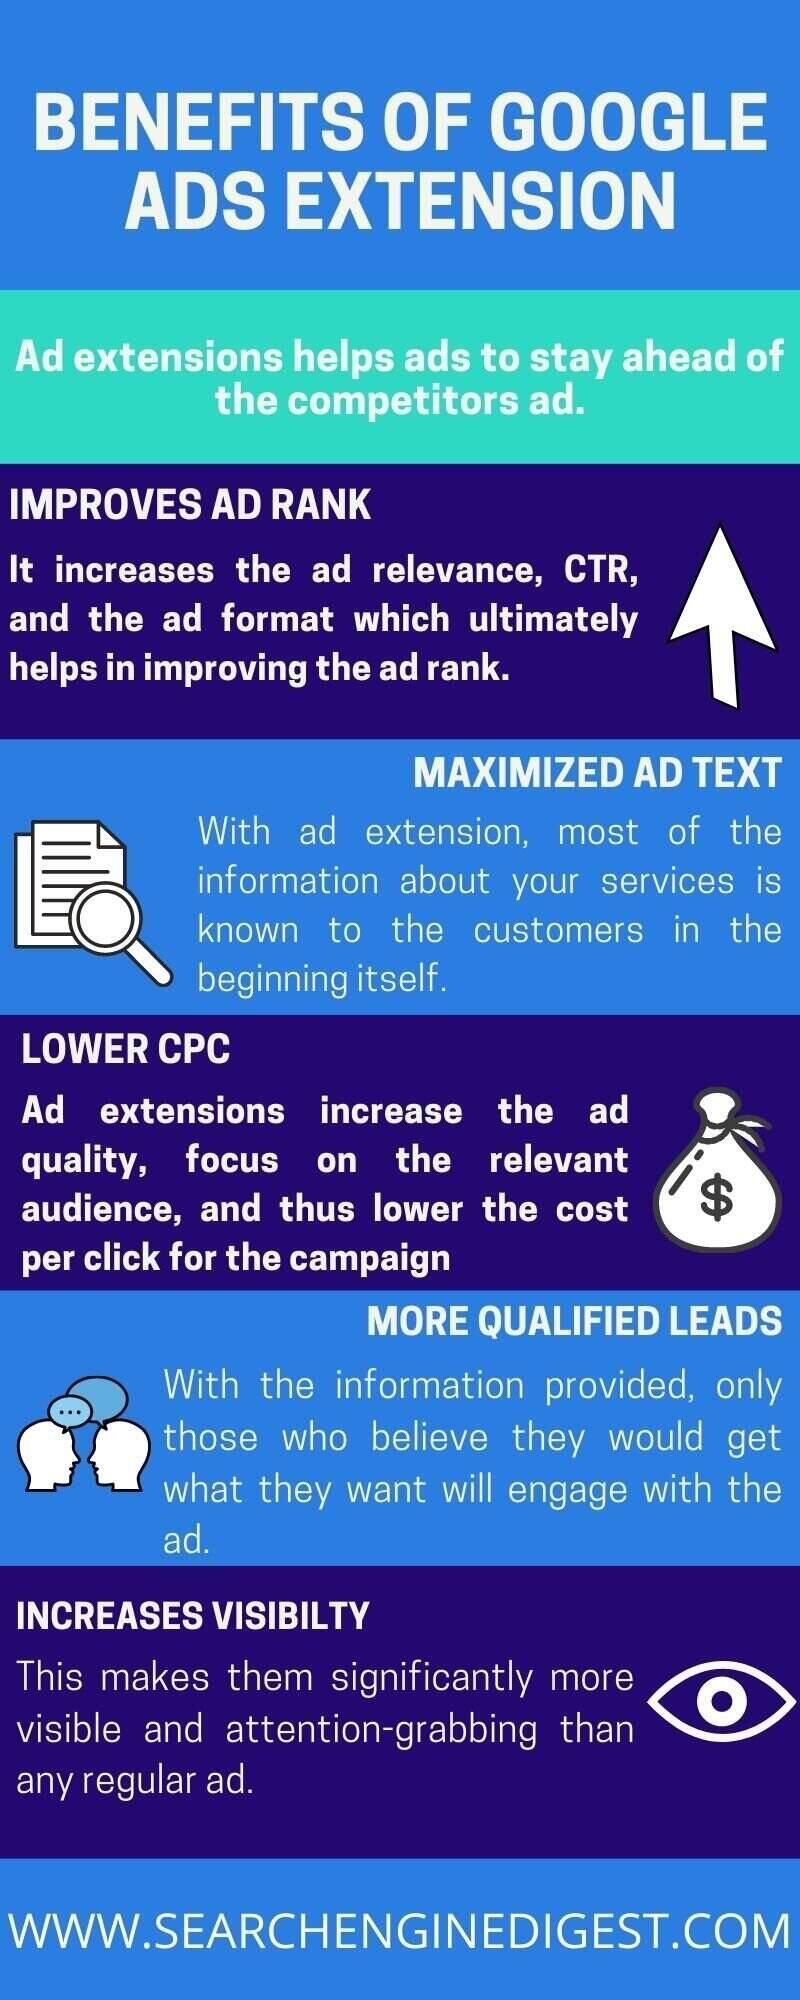 Benefits of Google Ads extensions